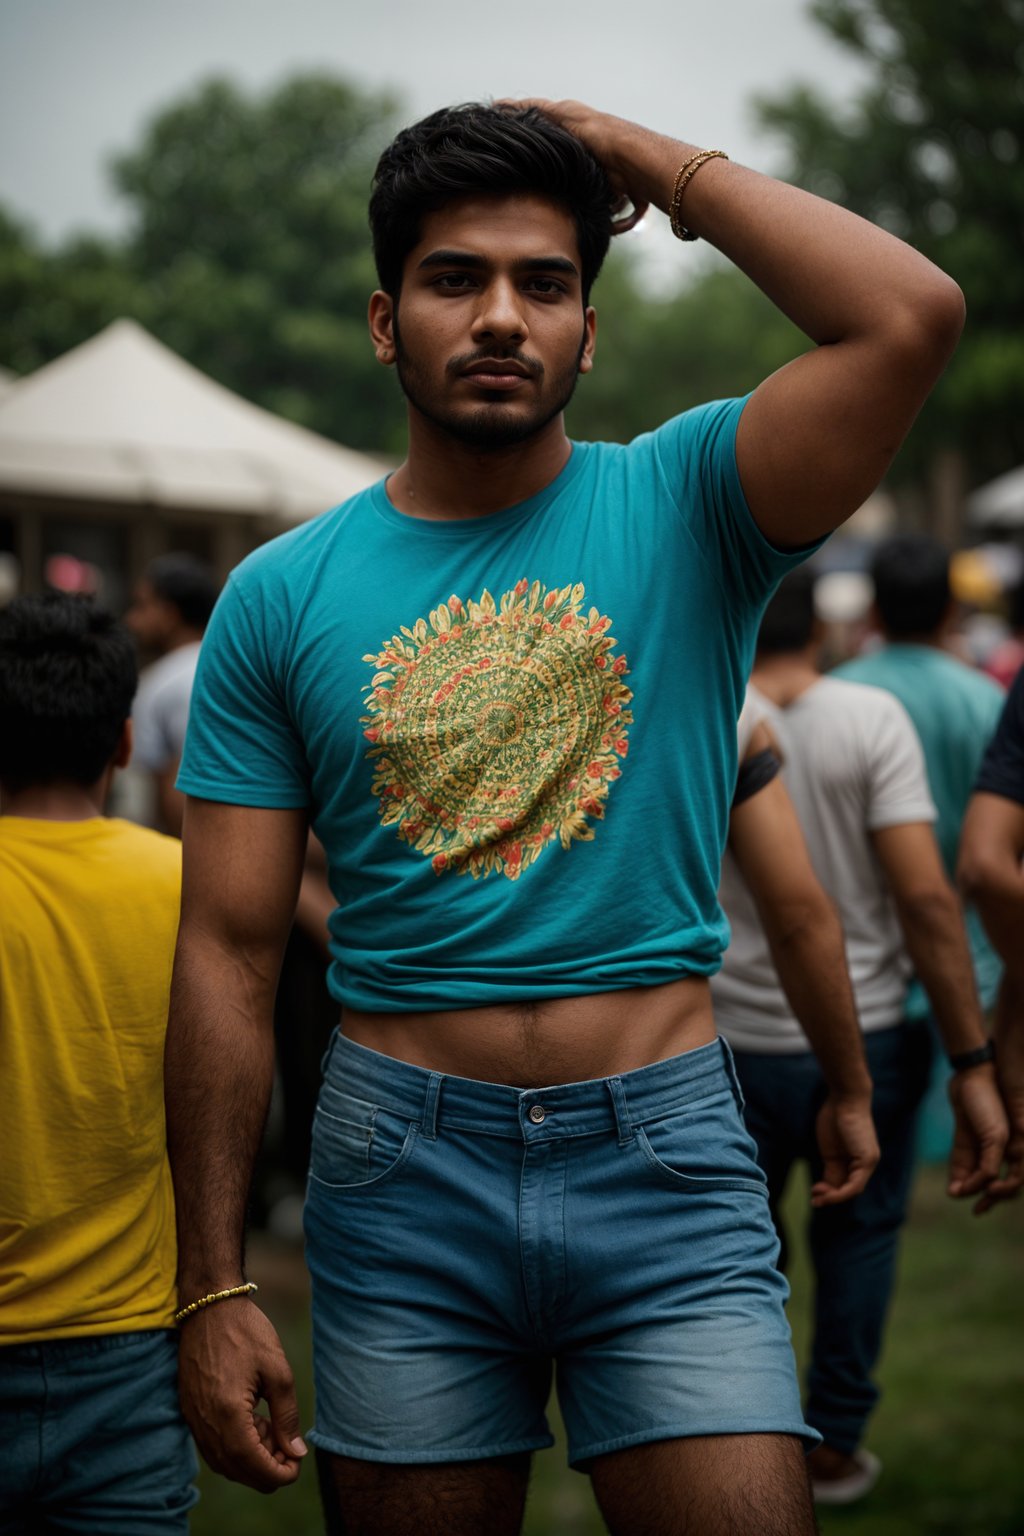 a stunning man as a festival-goer, dancing and enjoying the music in a vibrant crowd, wearing  a colorful graphic t-shirt and denim shorts